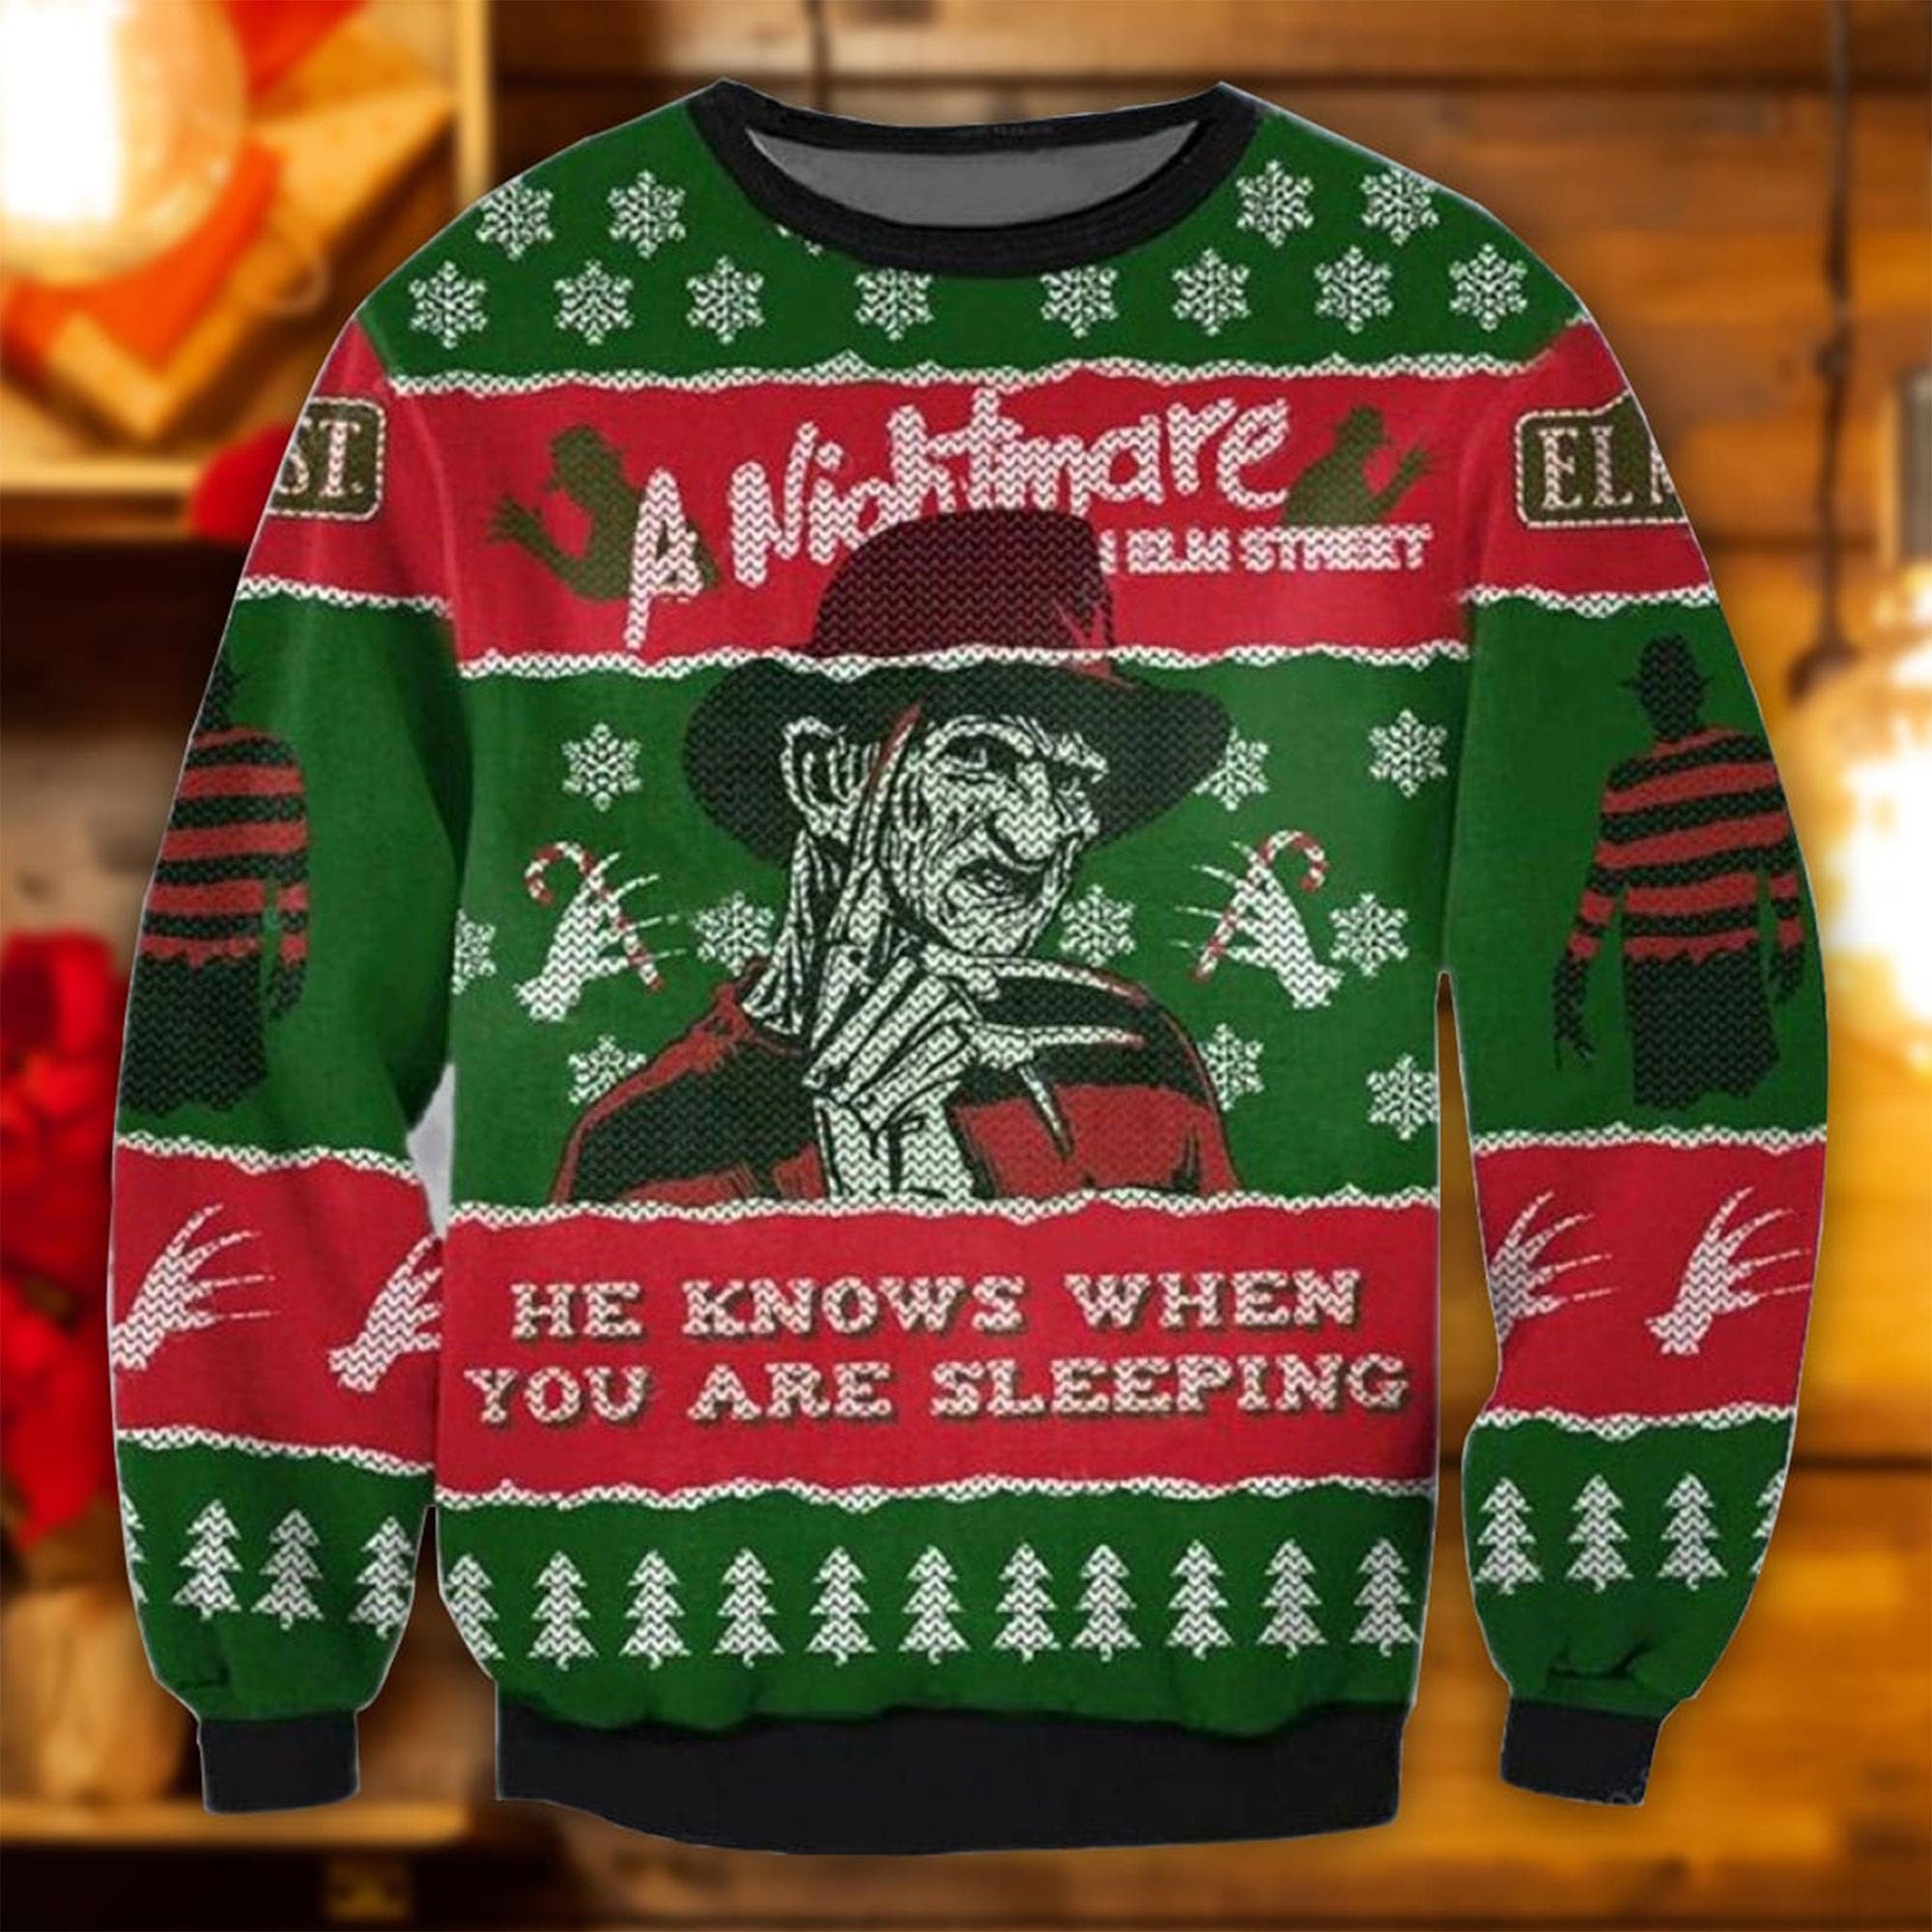 He Knows When You Are Sleeping - Ugly Sweater